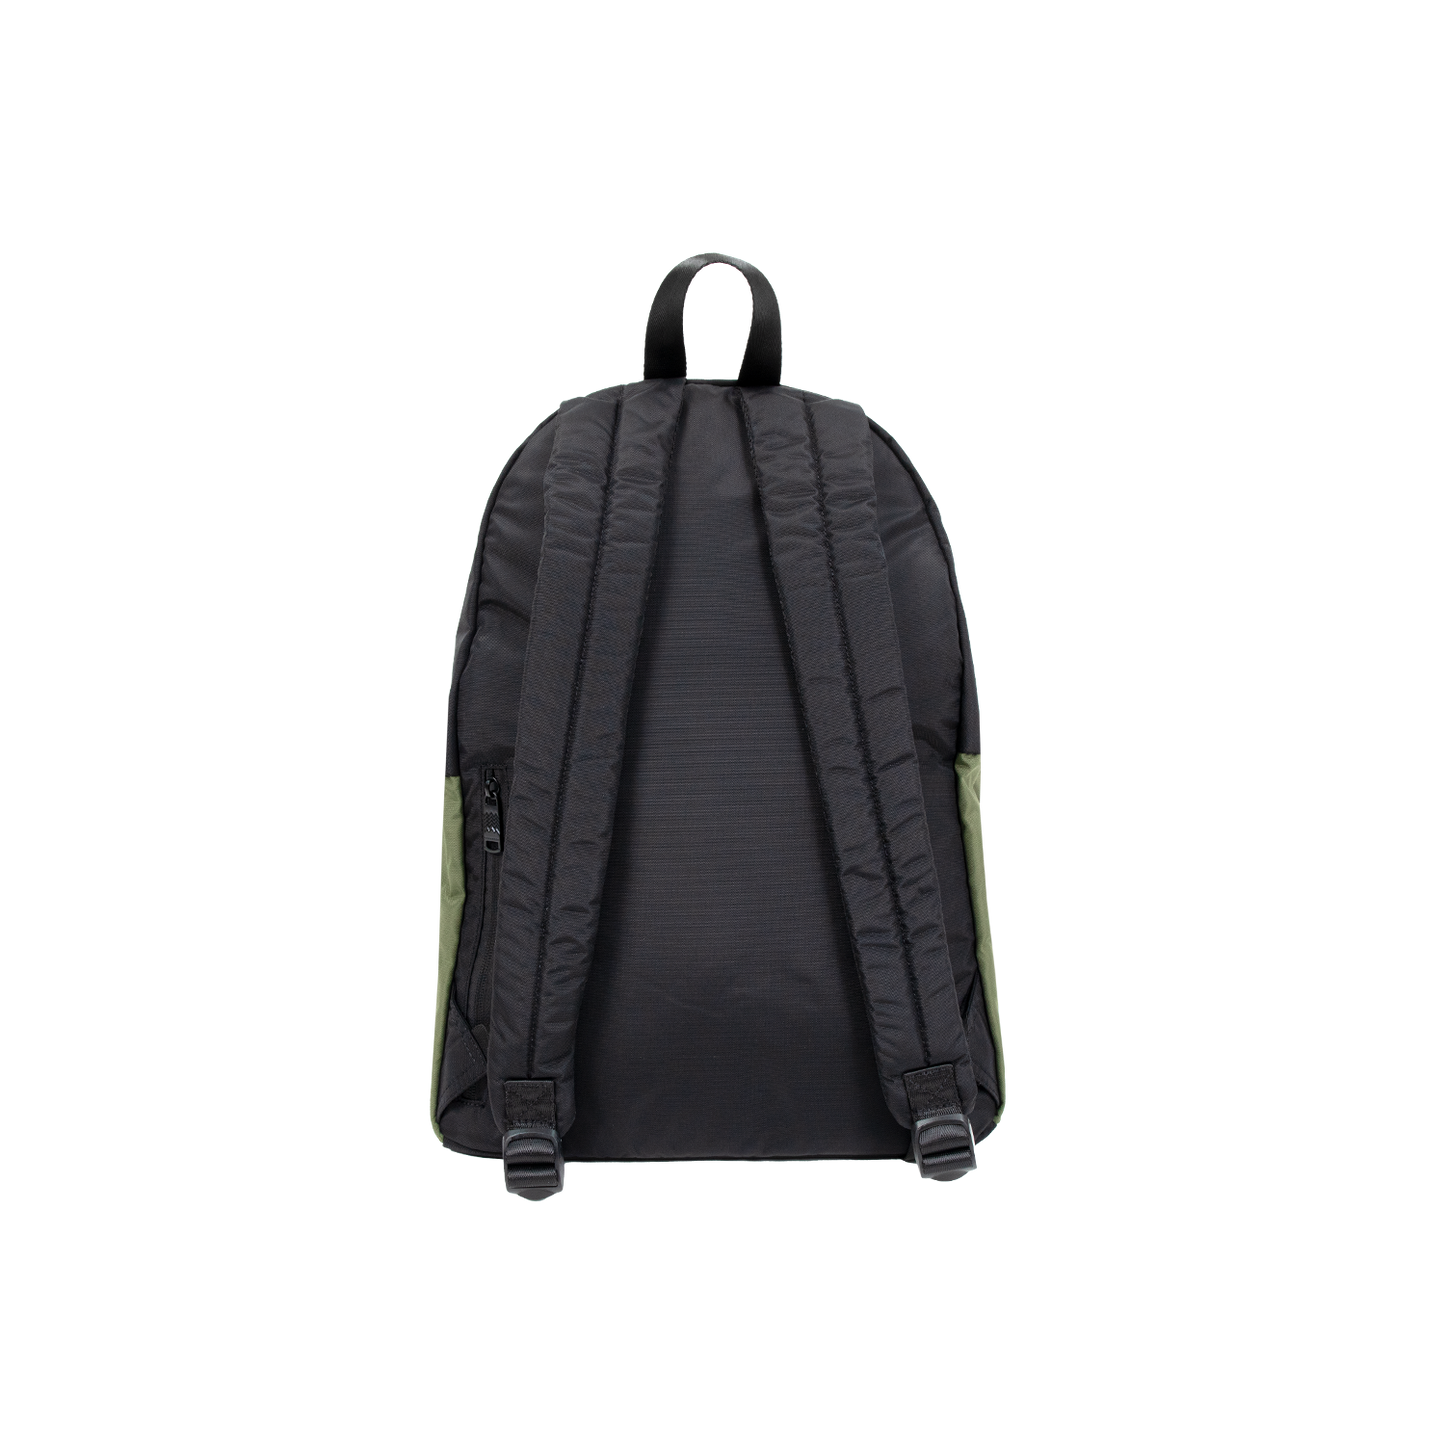 Plus One Go Wild Series Backpack